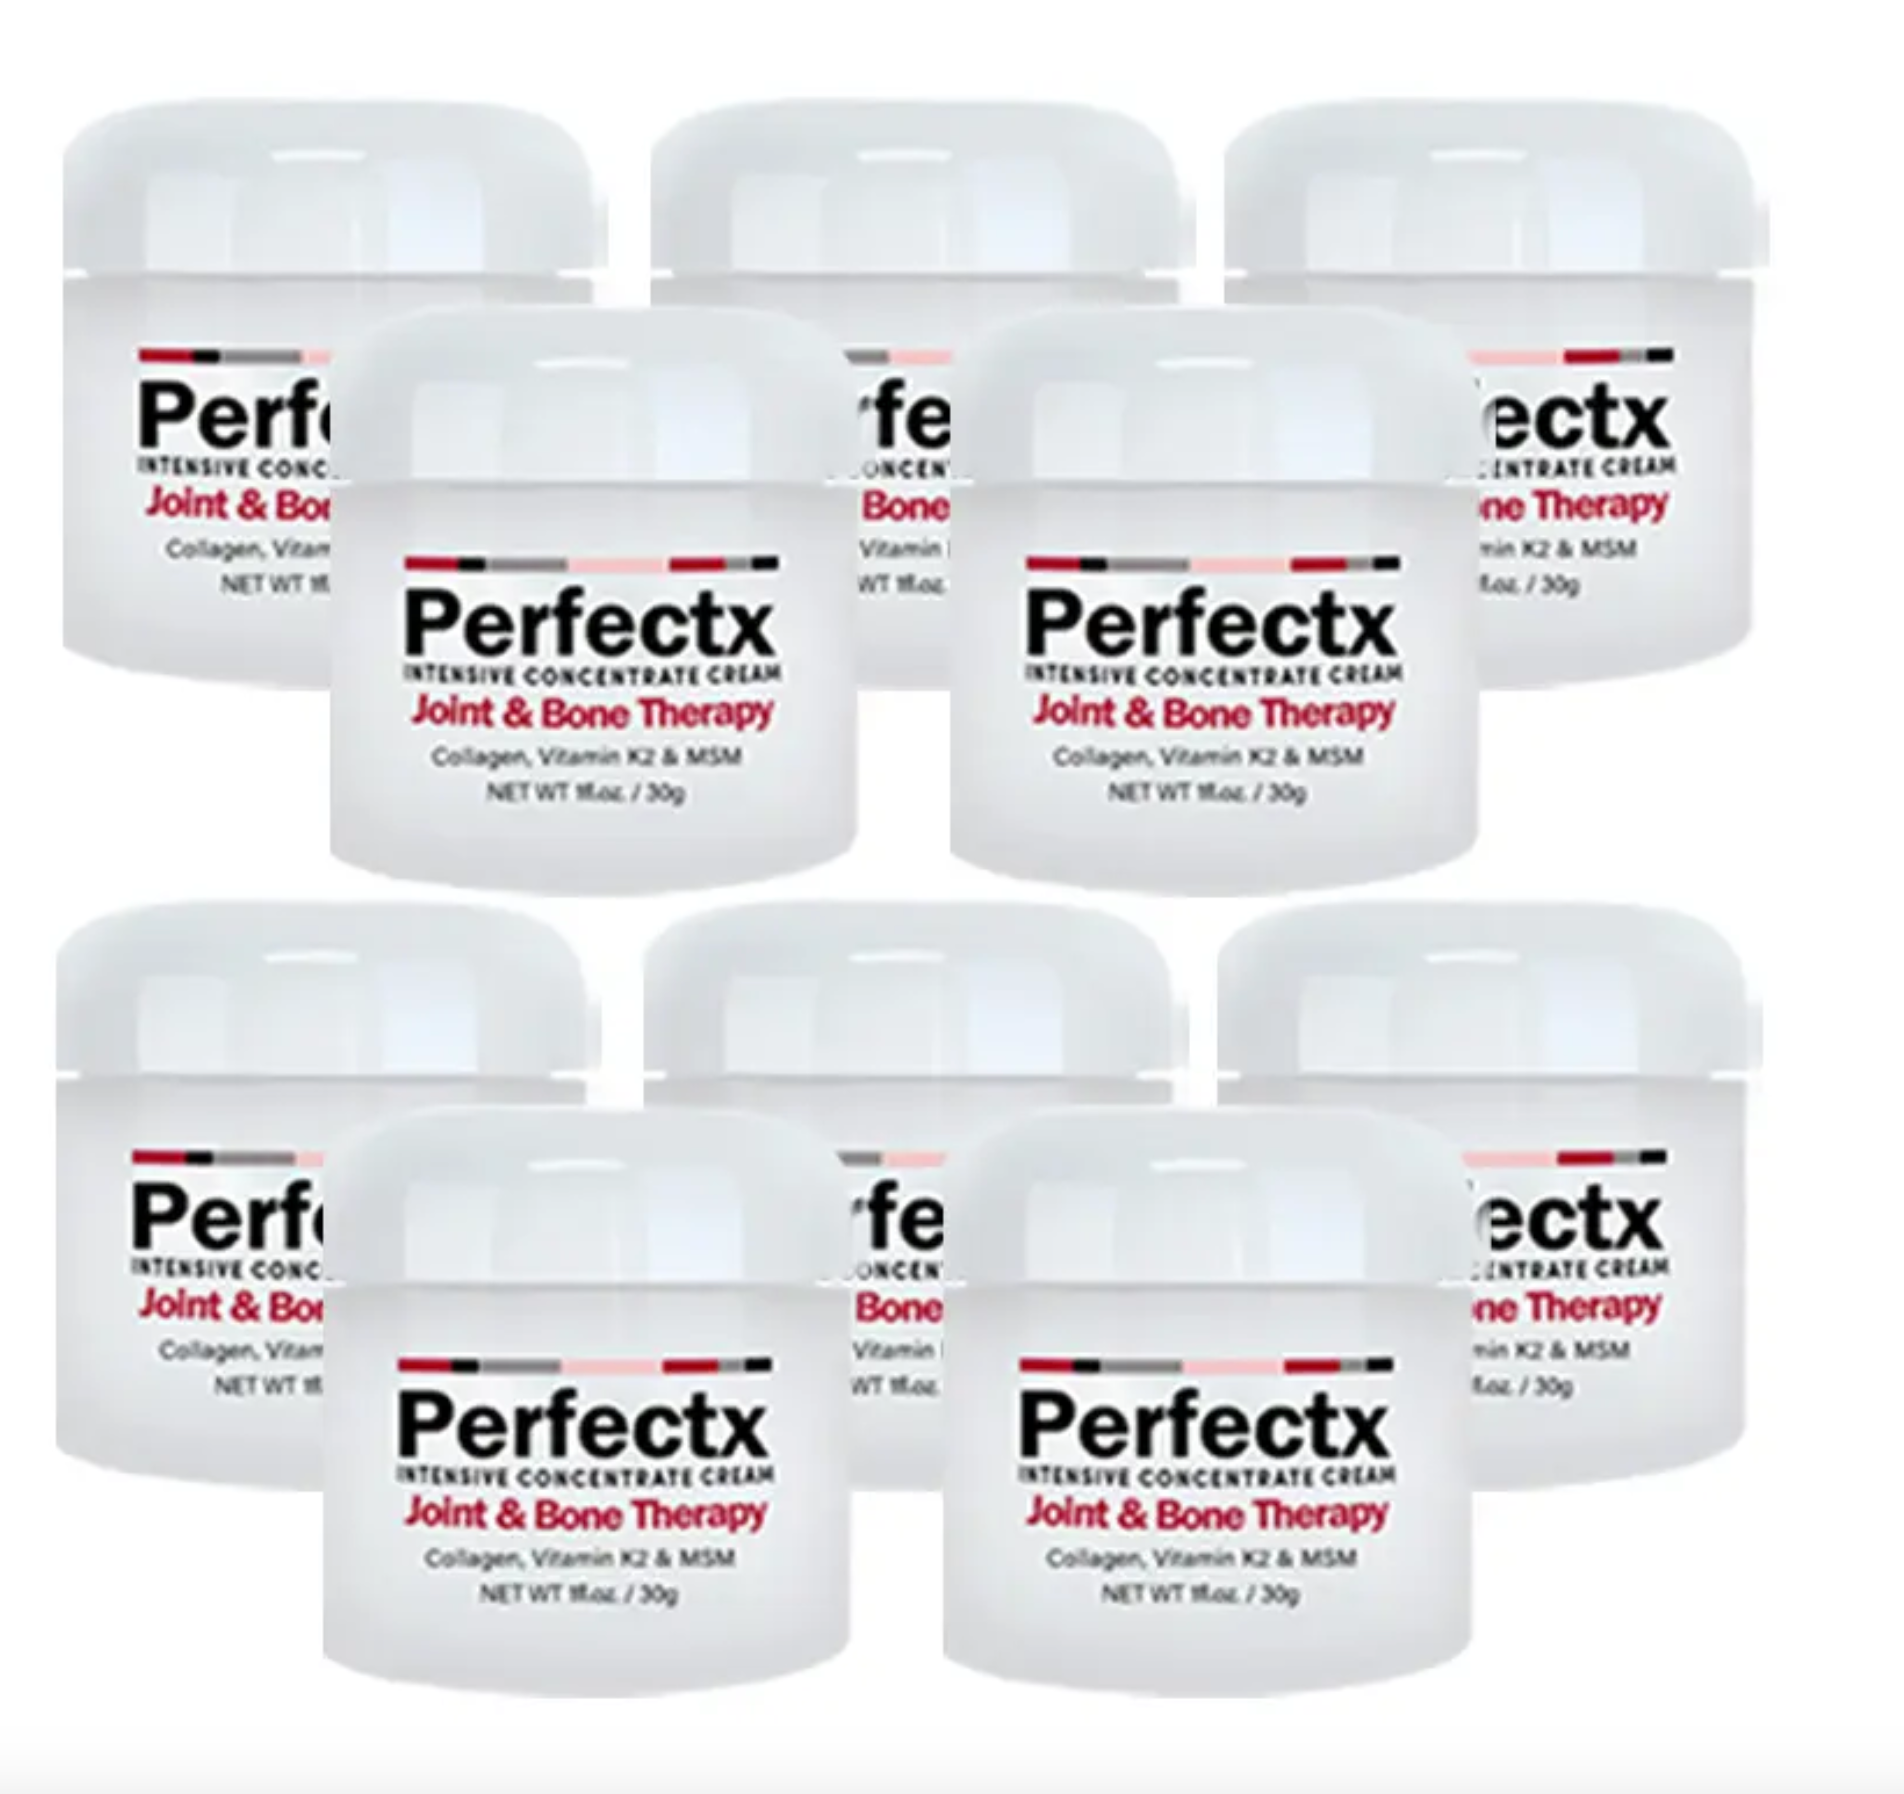 CC Perfectx Joint And Bone Therapy Cream(Limited Time Discount - Last Day)